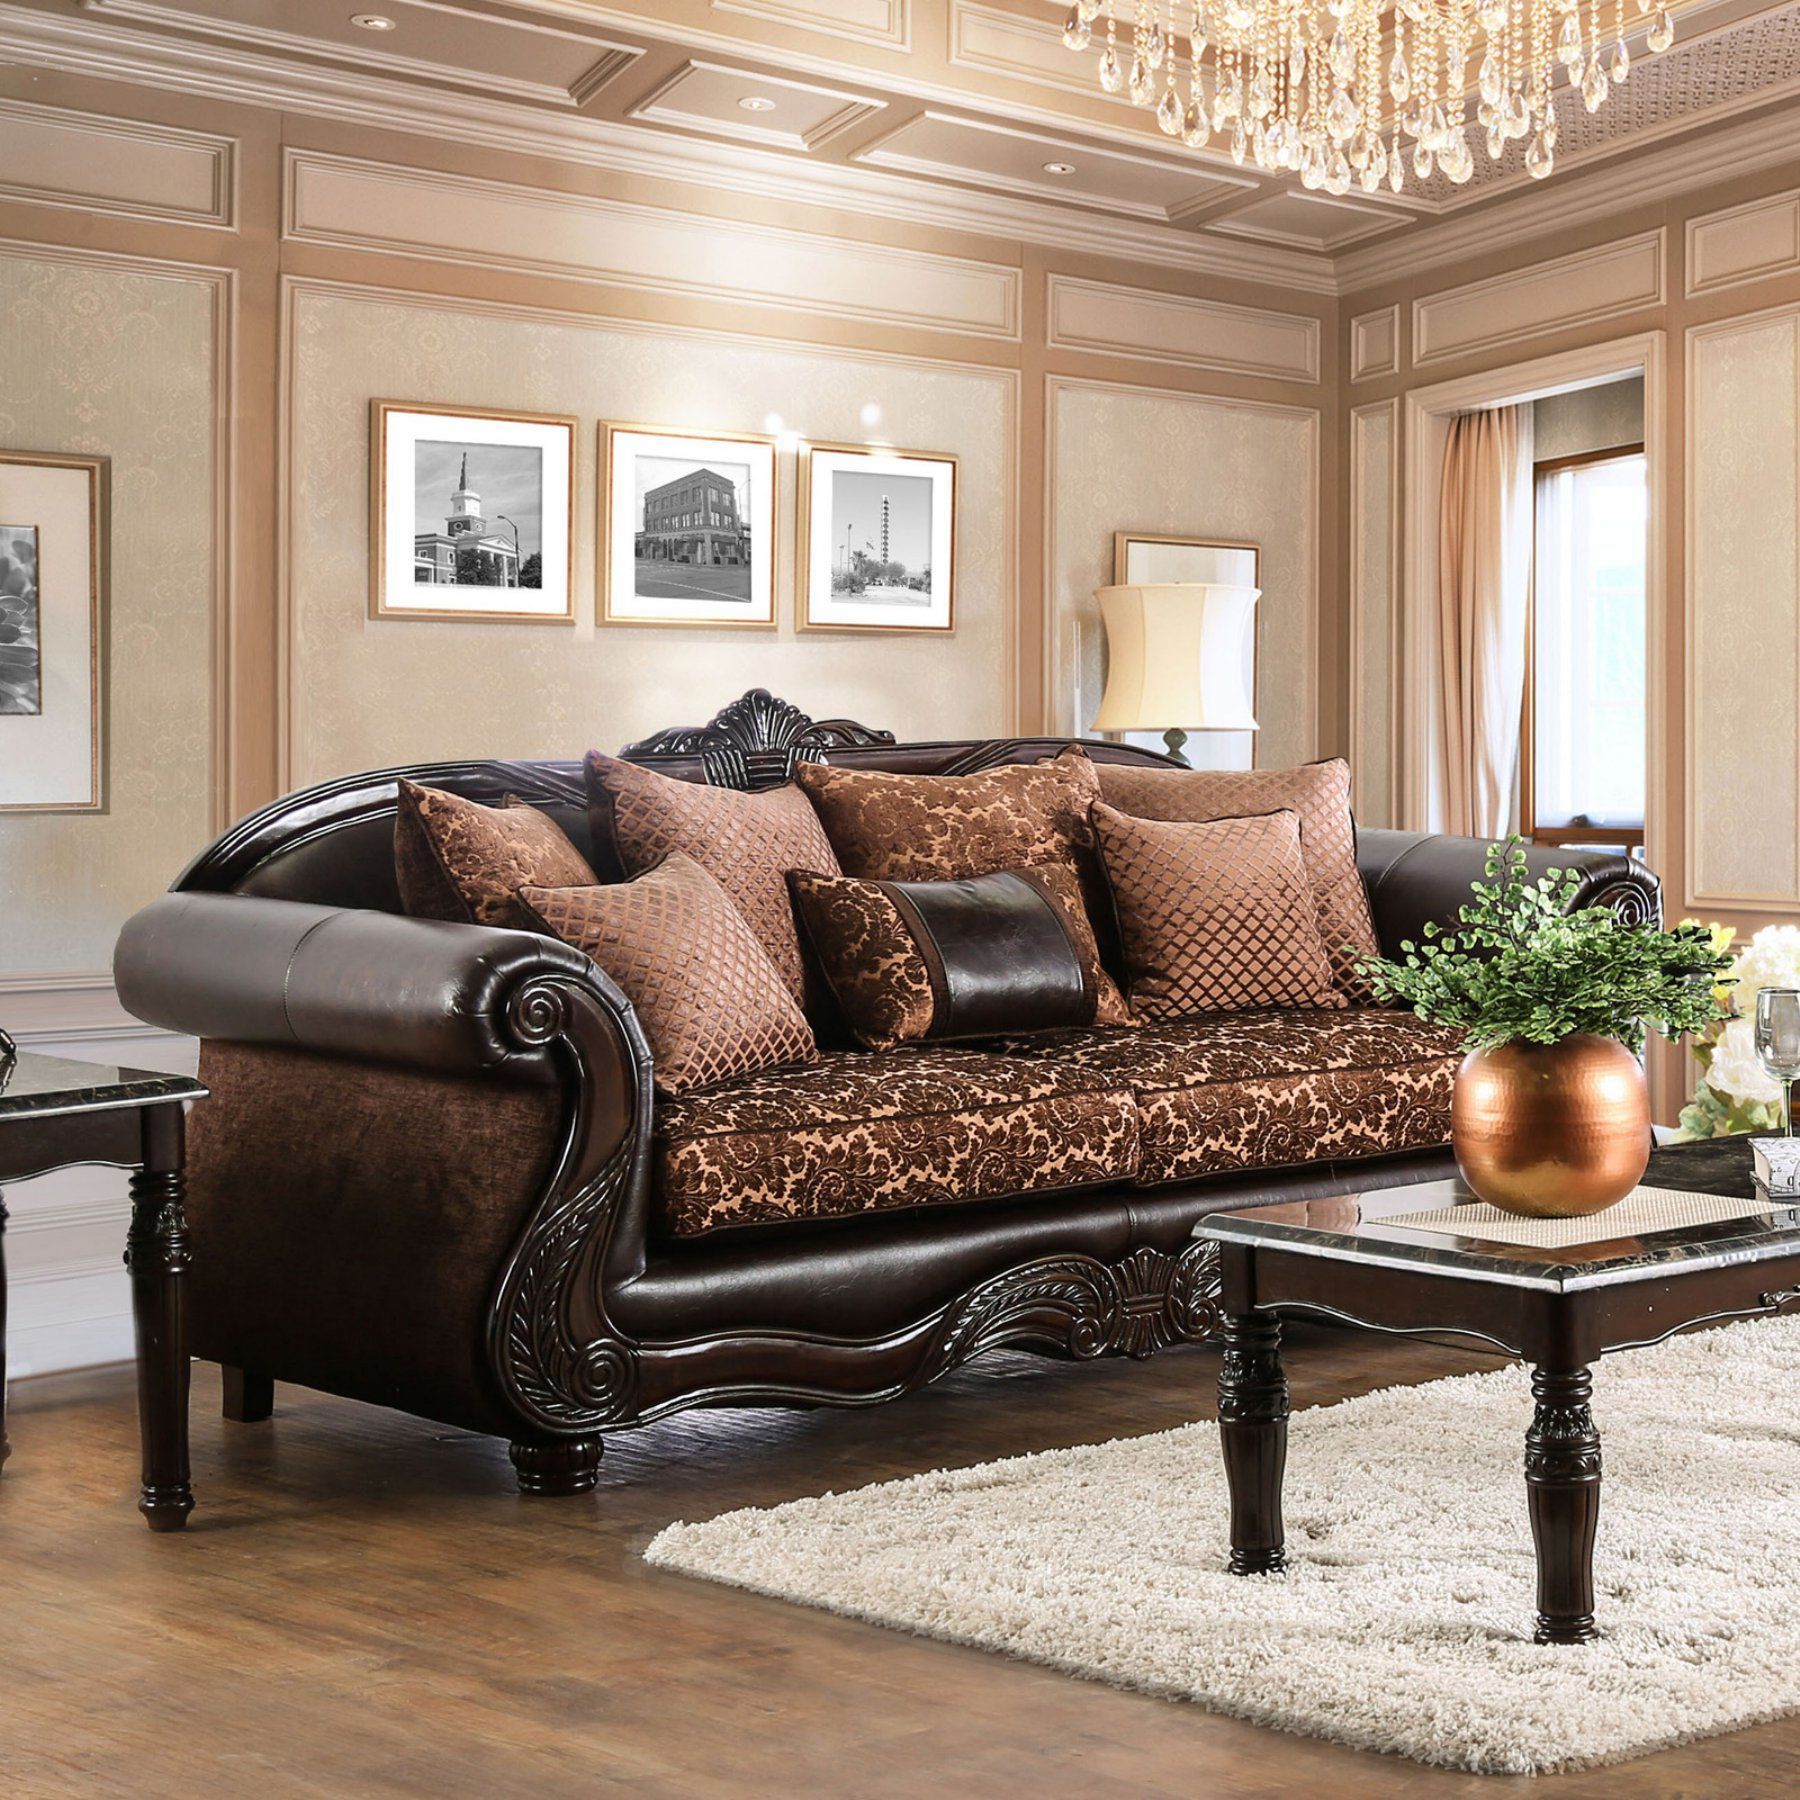 Furniture Of America Maldino Traditional Style Intricate Wood Carved Within Sofas With Pillowback Wood Bases (View 5 of 20)